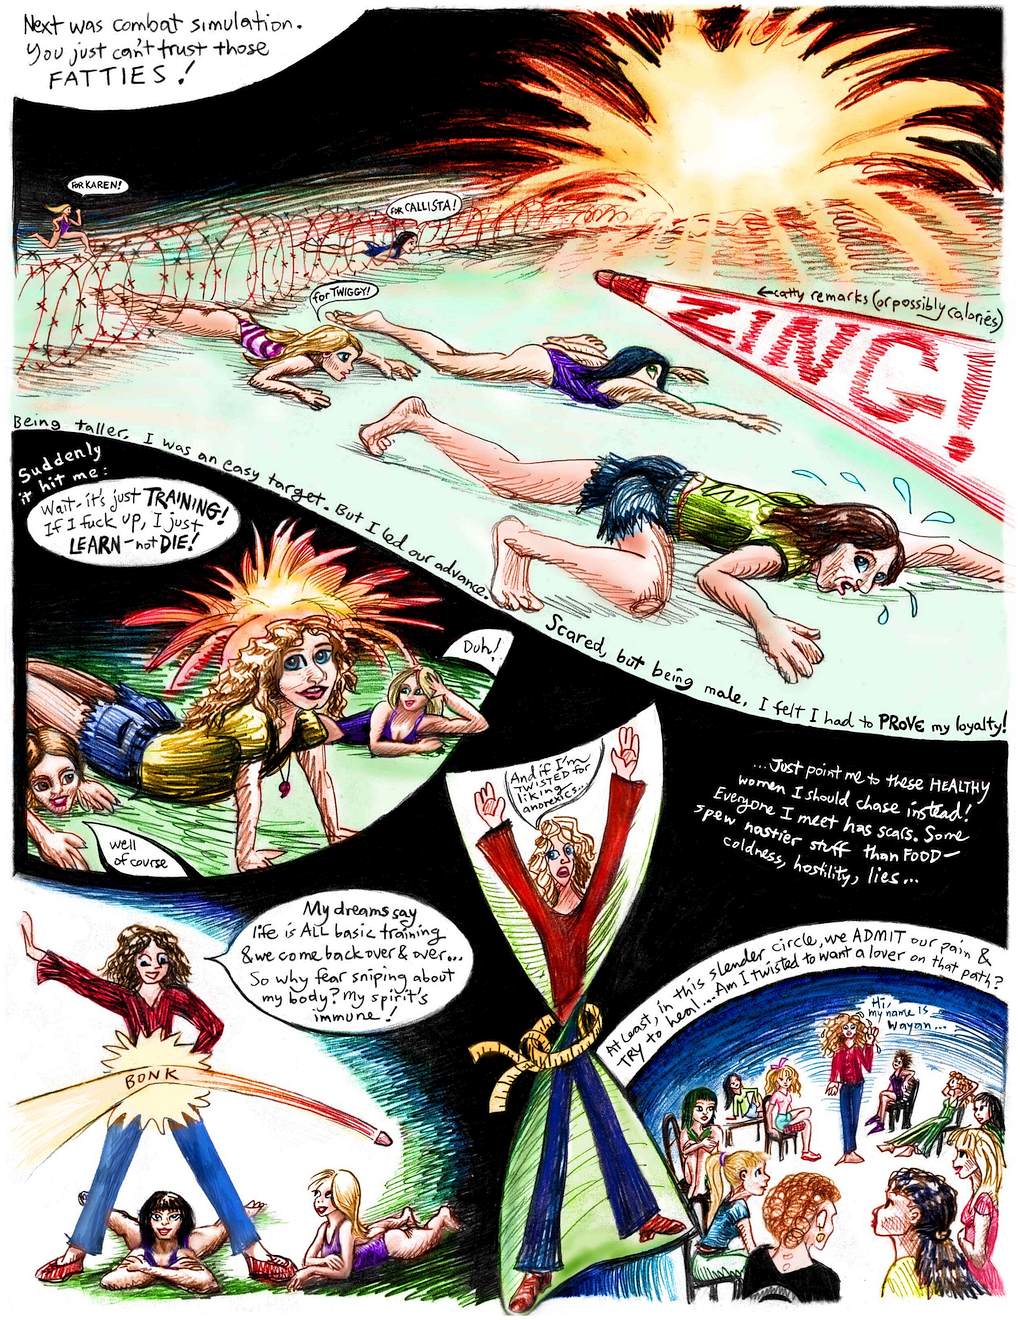 Comic of a dream by Chris Wayan about anorexia. Anorexics face sniper fire--gossip, or are those calories?